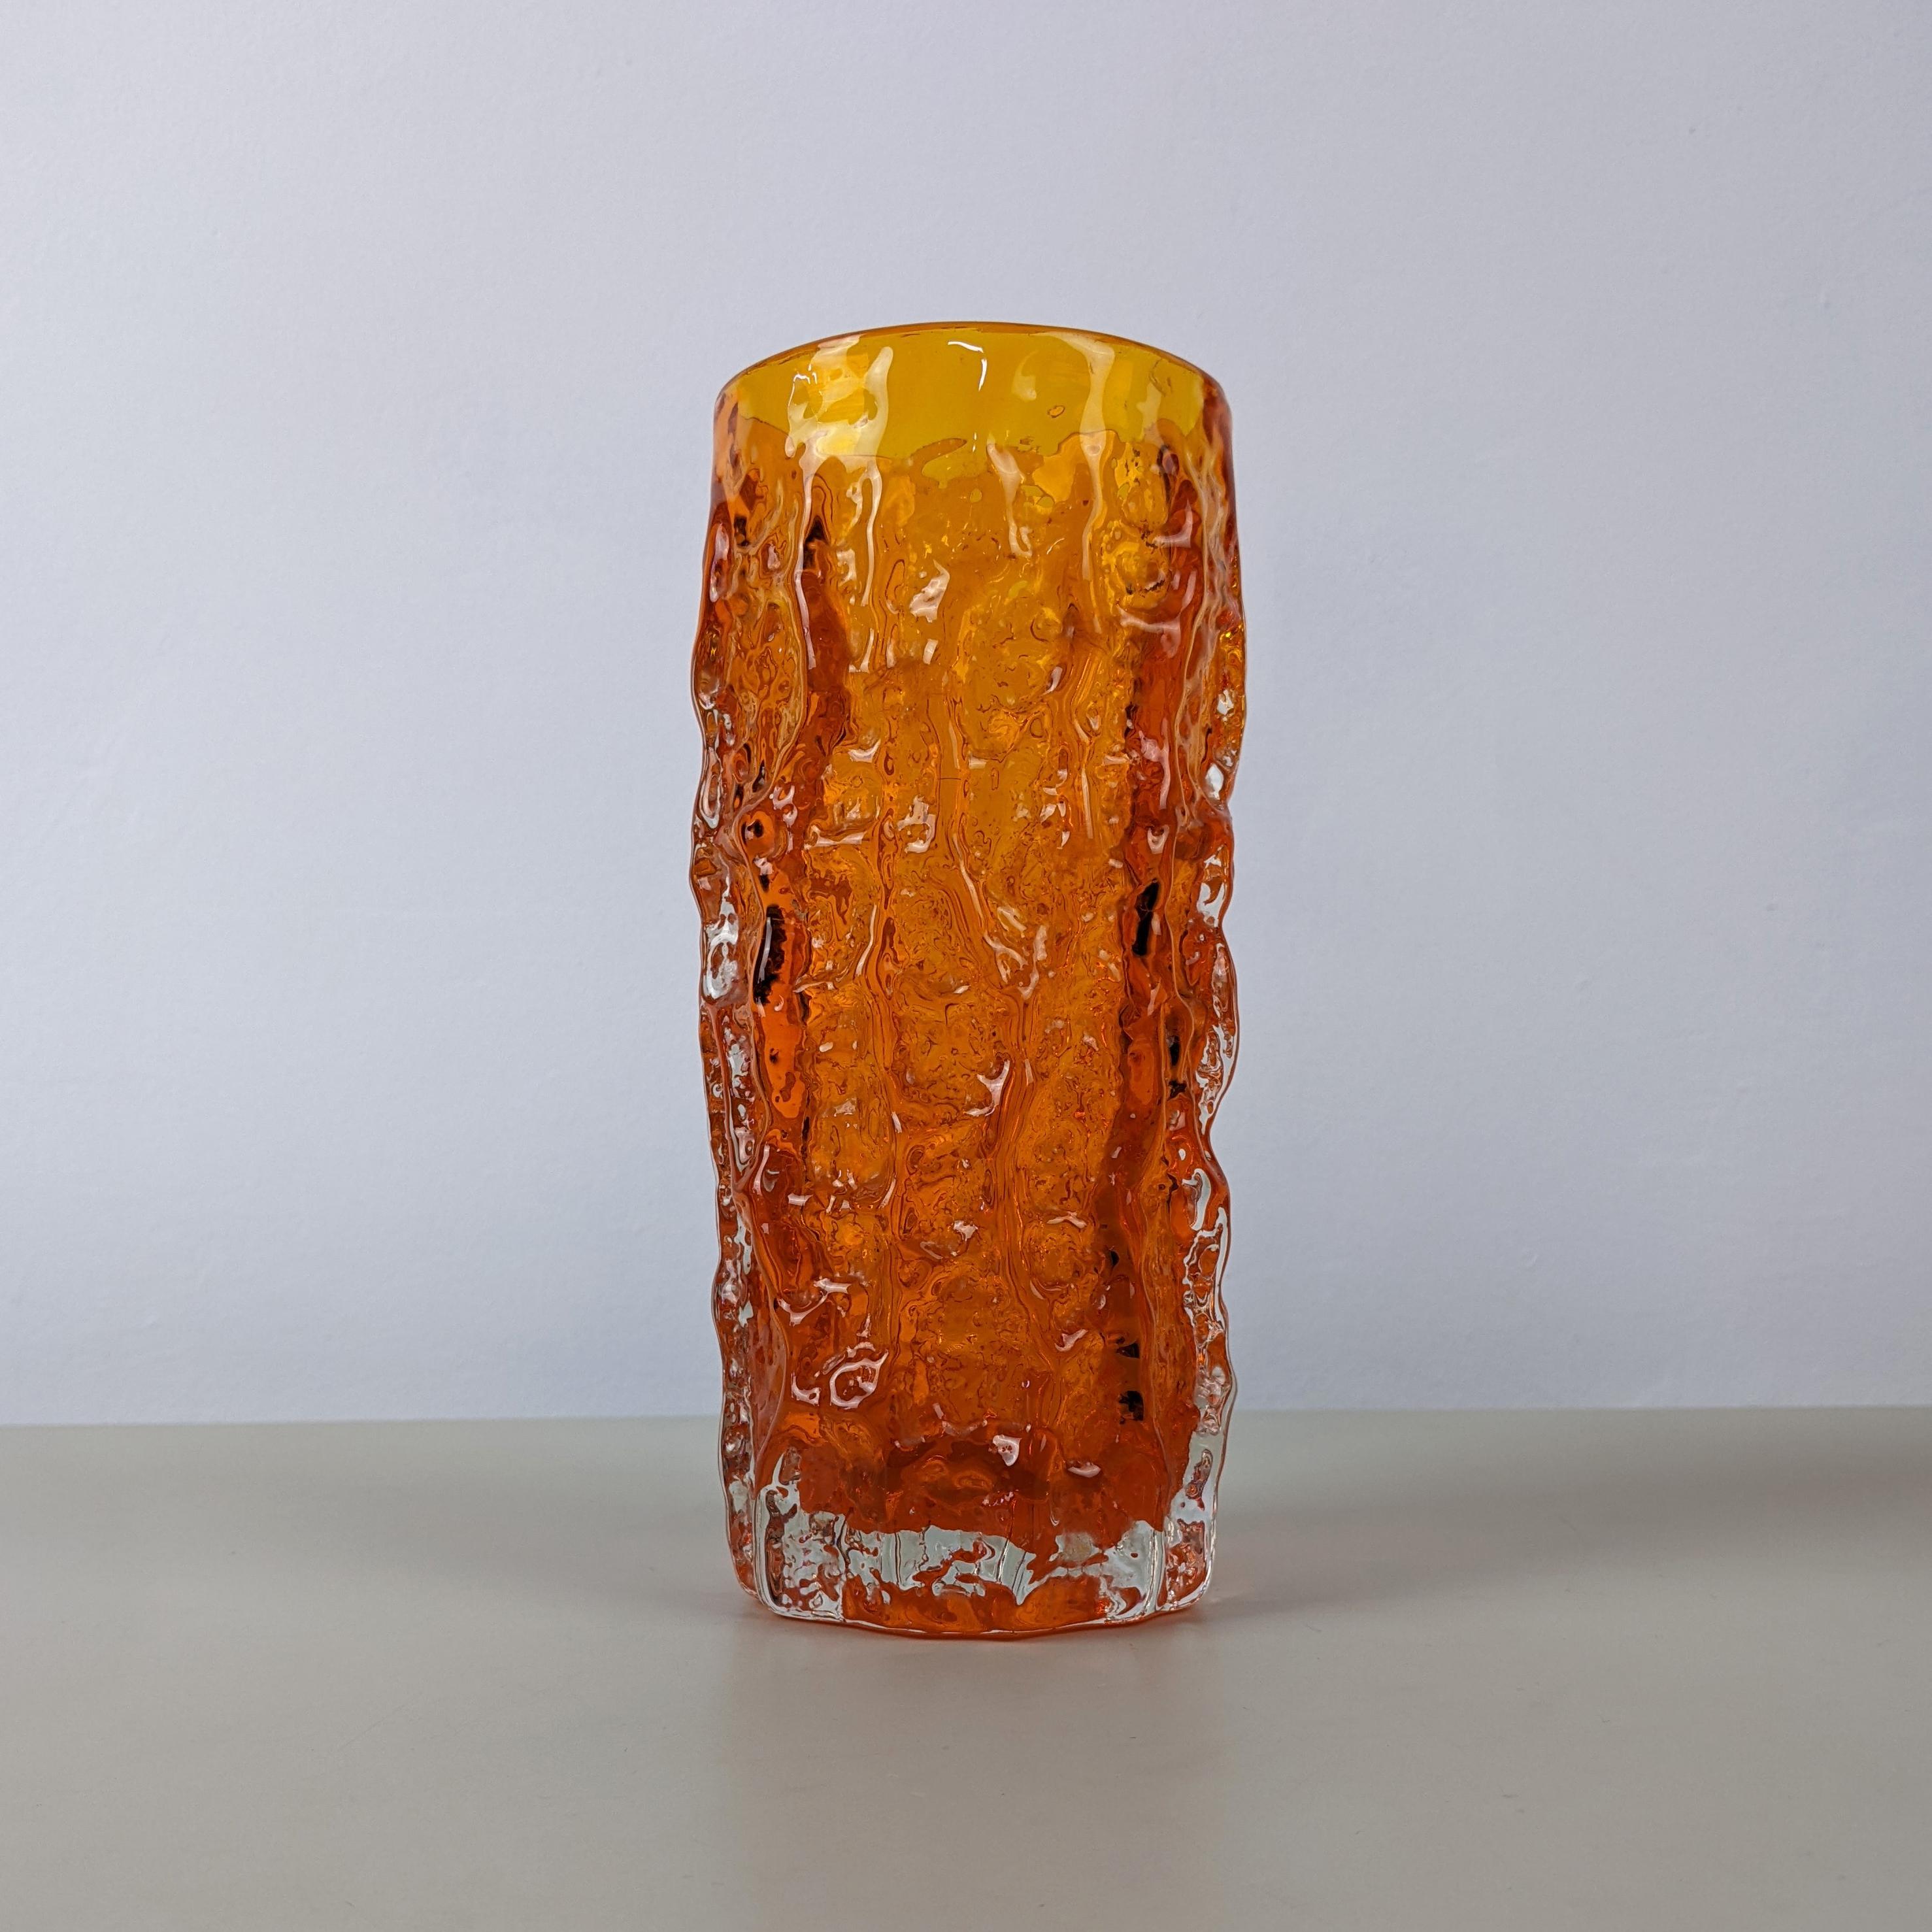 Geoffrey Baxter for Whitefriars, c. 1960s
Medium ‘Bark’ vase, from the “Textured’ range, model number 9690
Orange tinted glass
Excellent condition without damage



Dimensions (approx.): Height 19cm, diameter 8.5cm
Weight: 1000g.